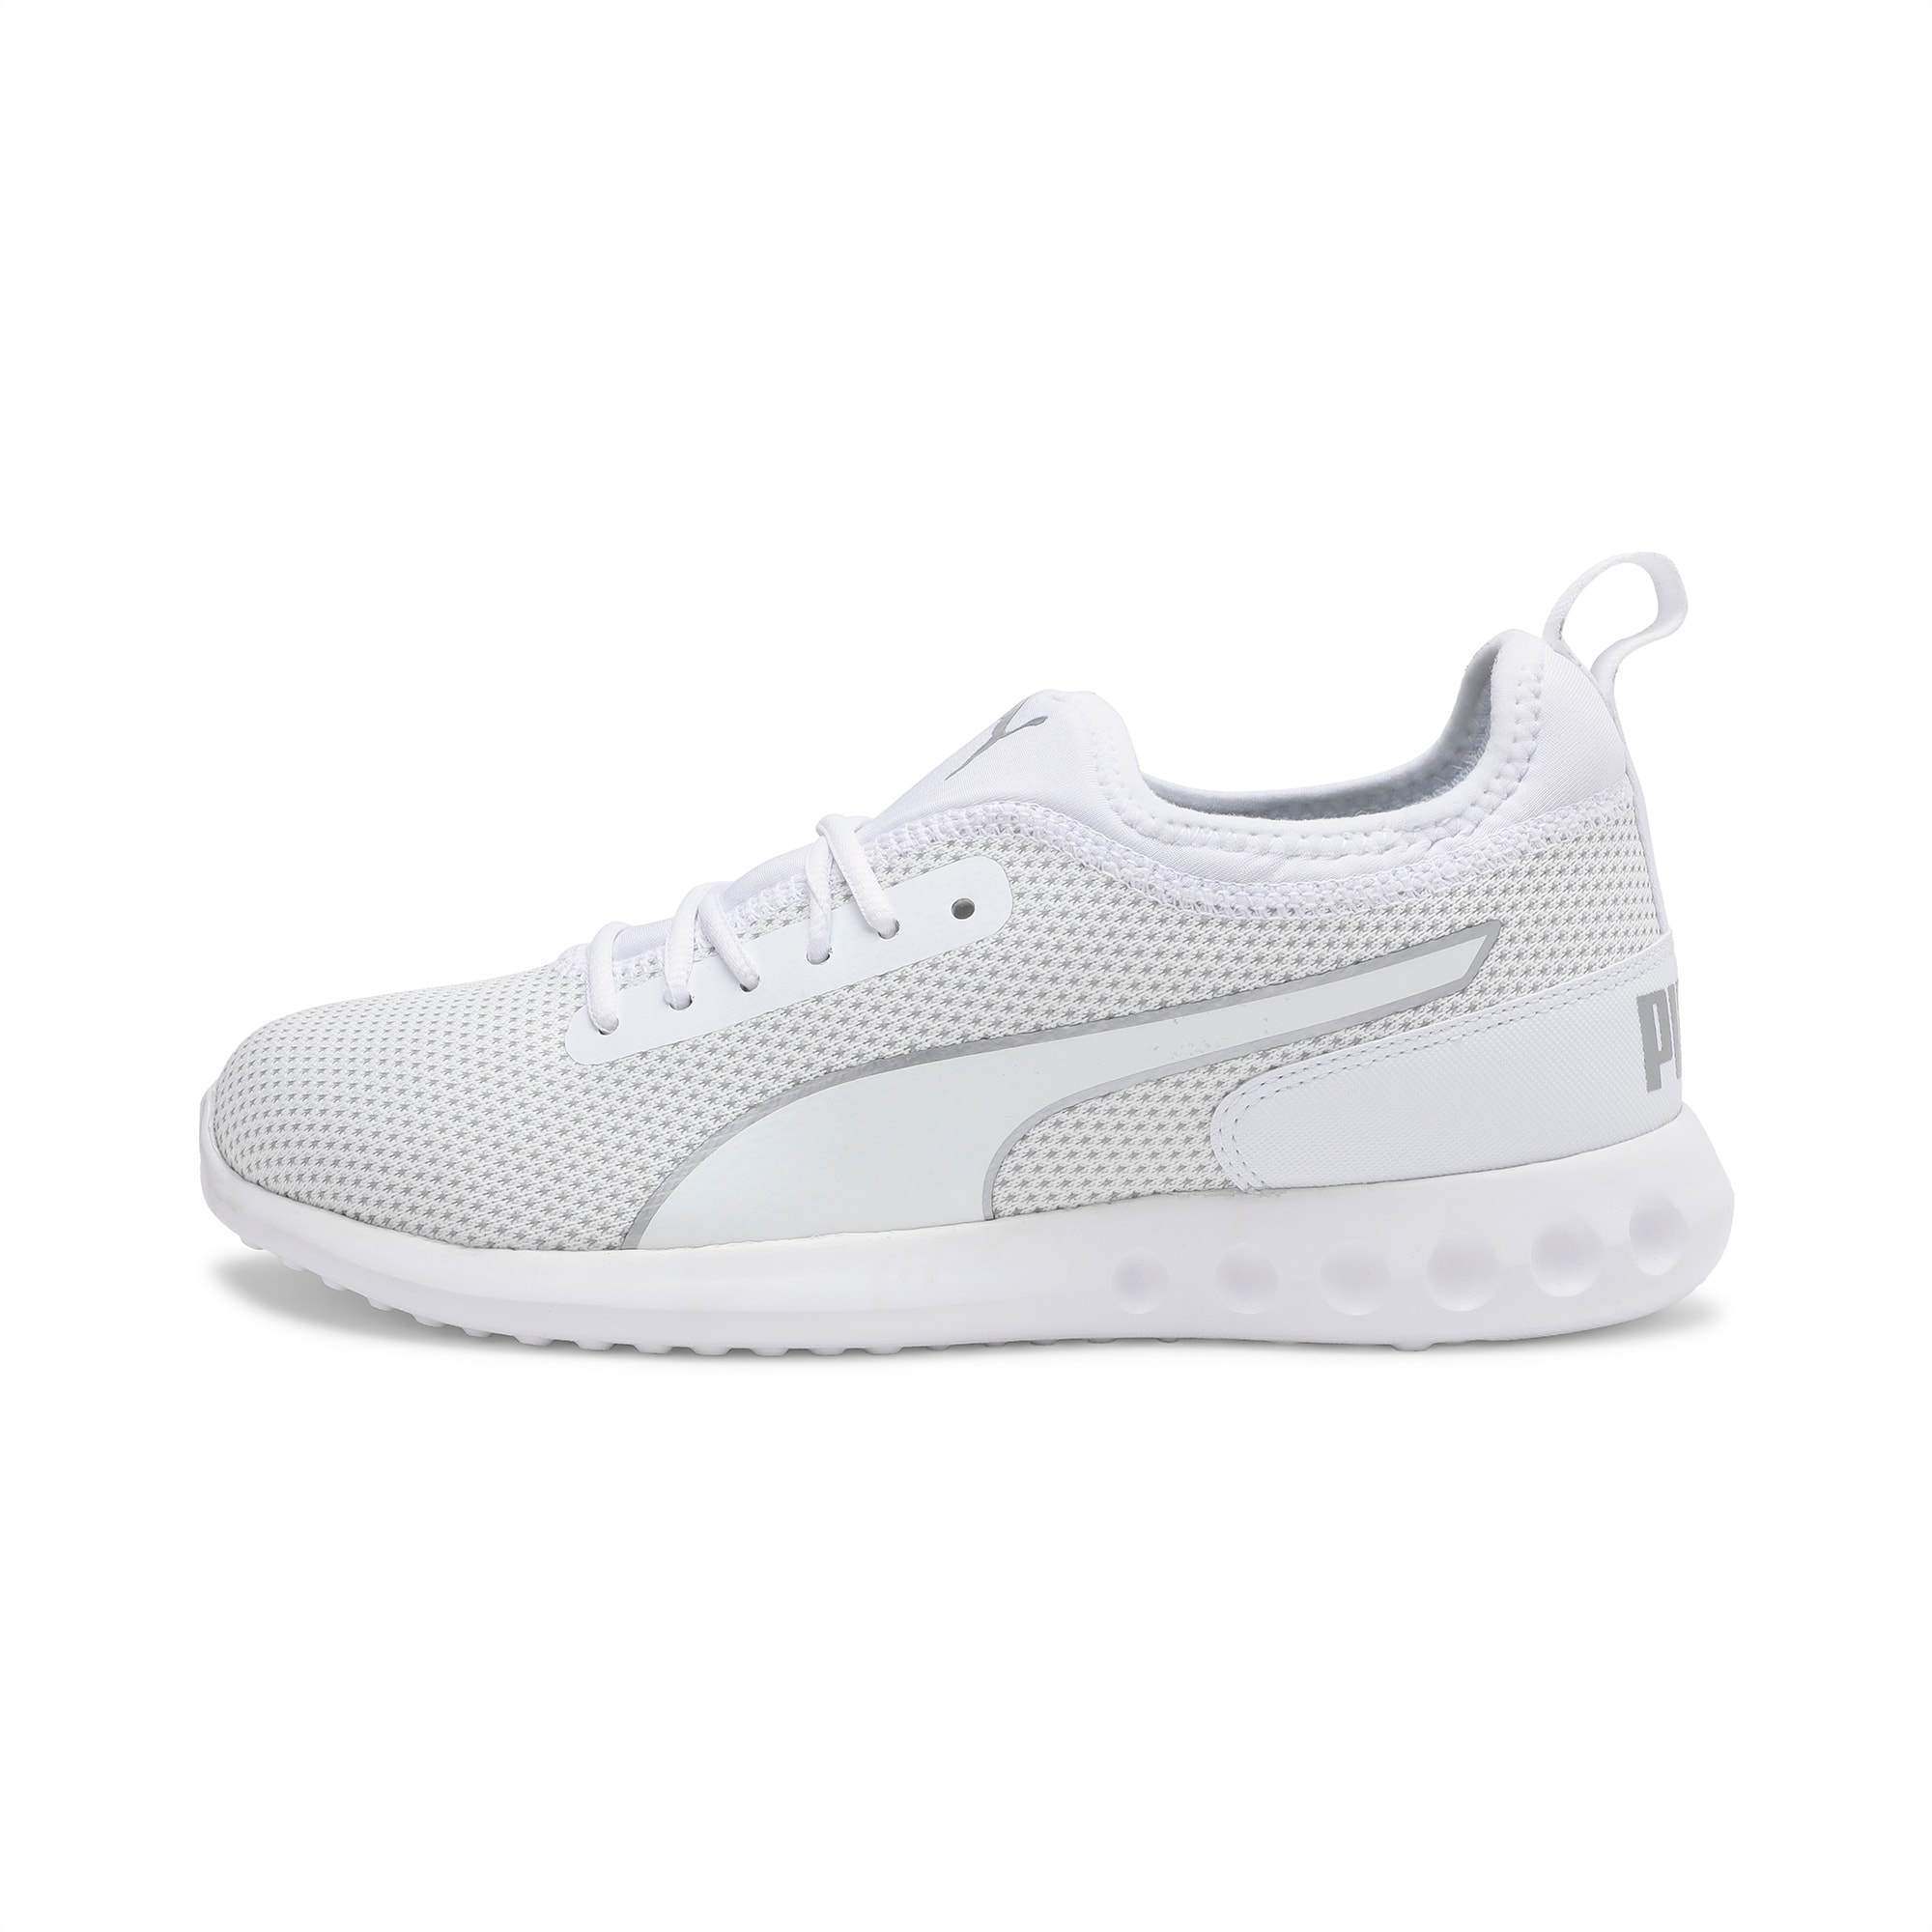 Concave v2 IDP Runing Shoe | White 